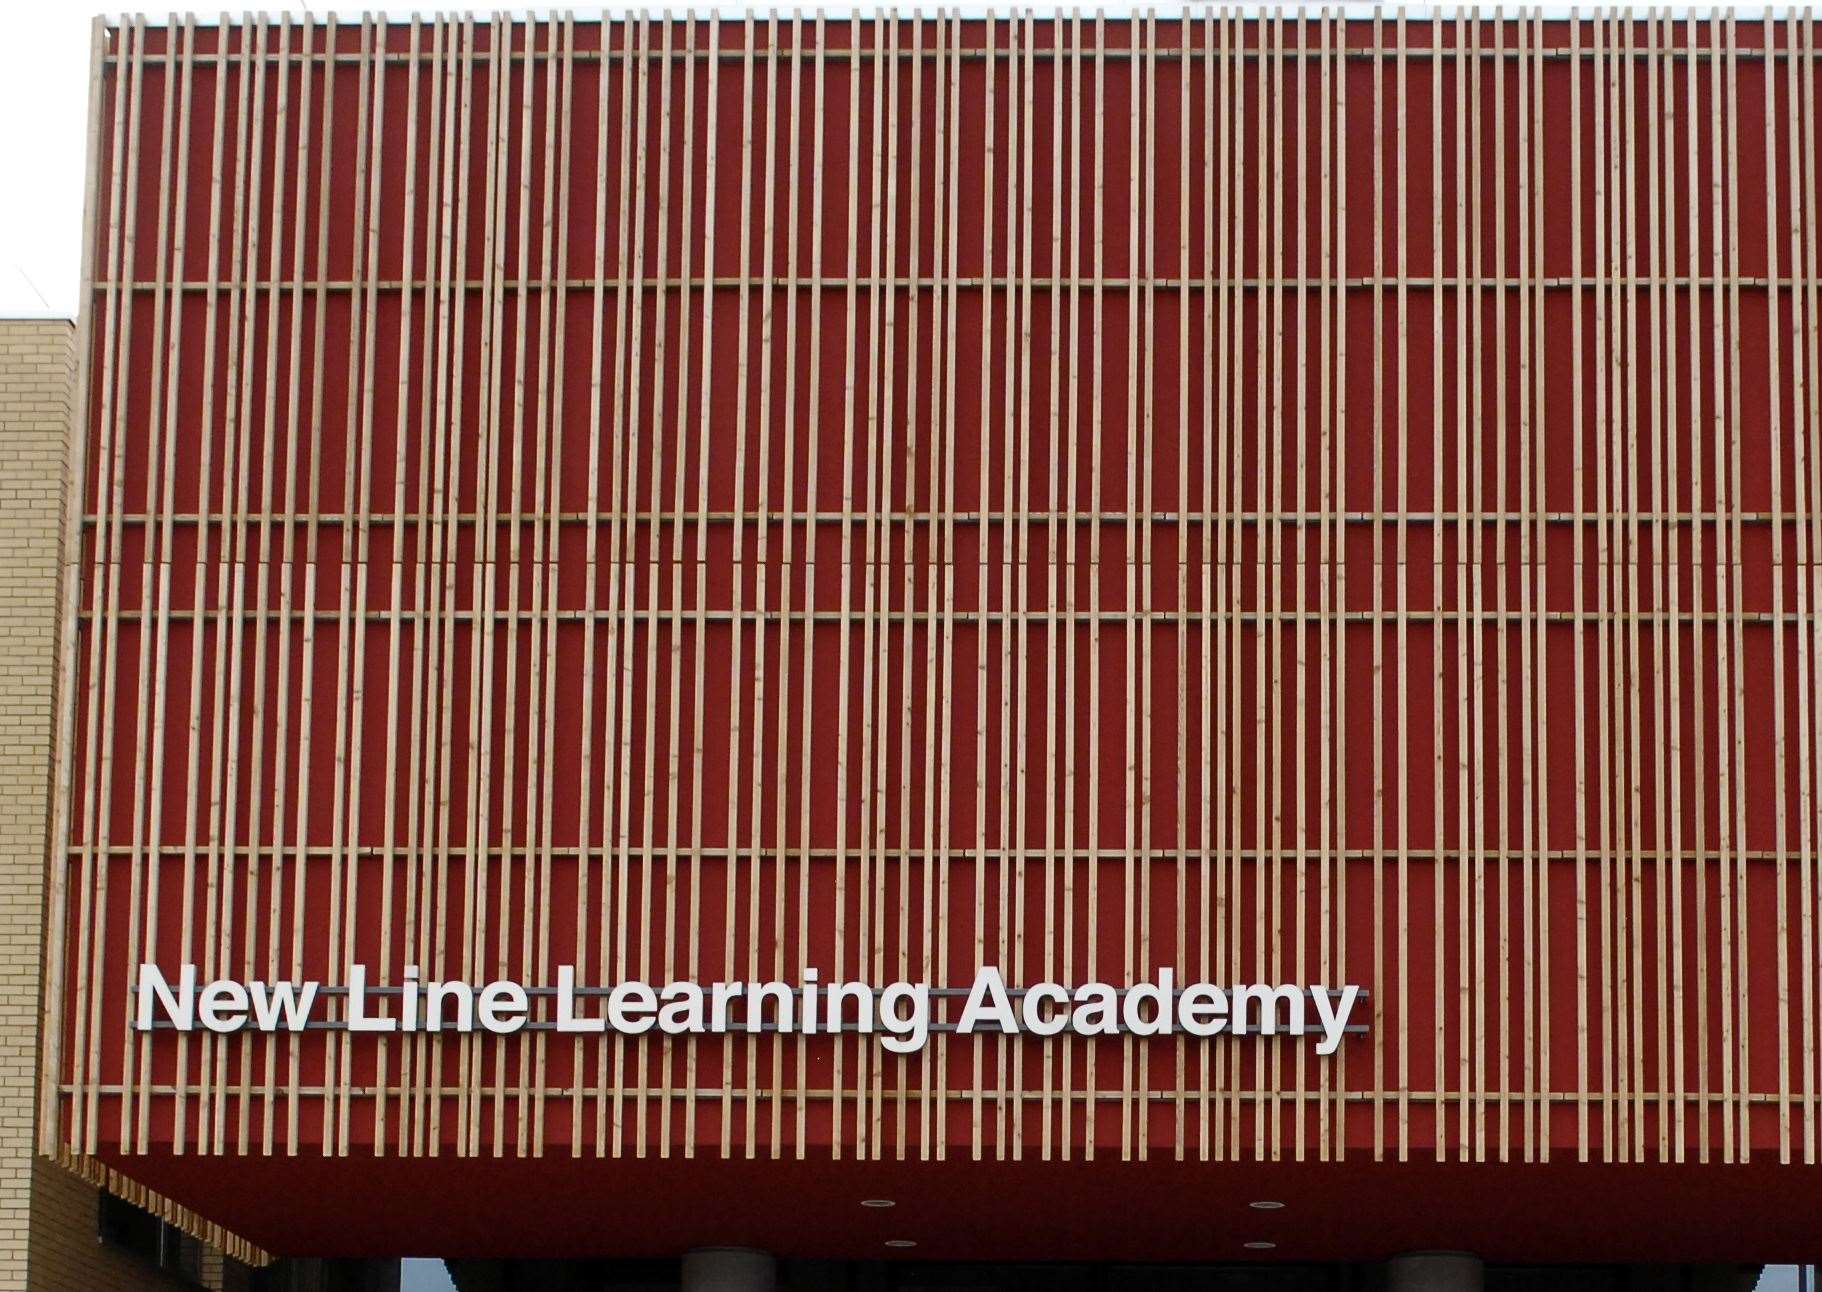 New Line Learning Academy in Boughton Lane, Loose